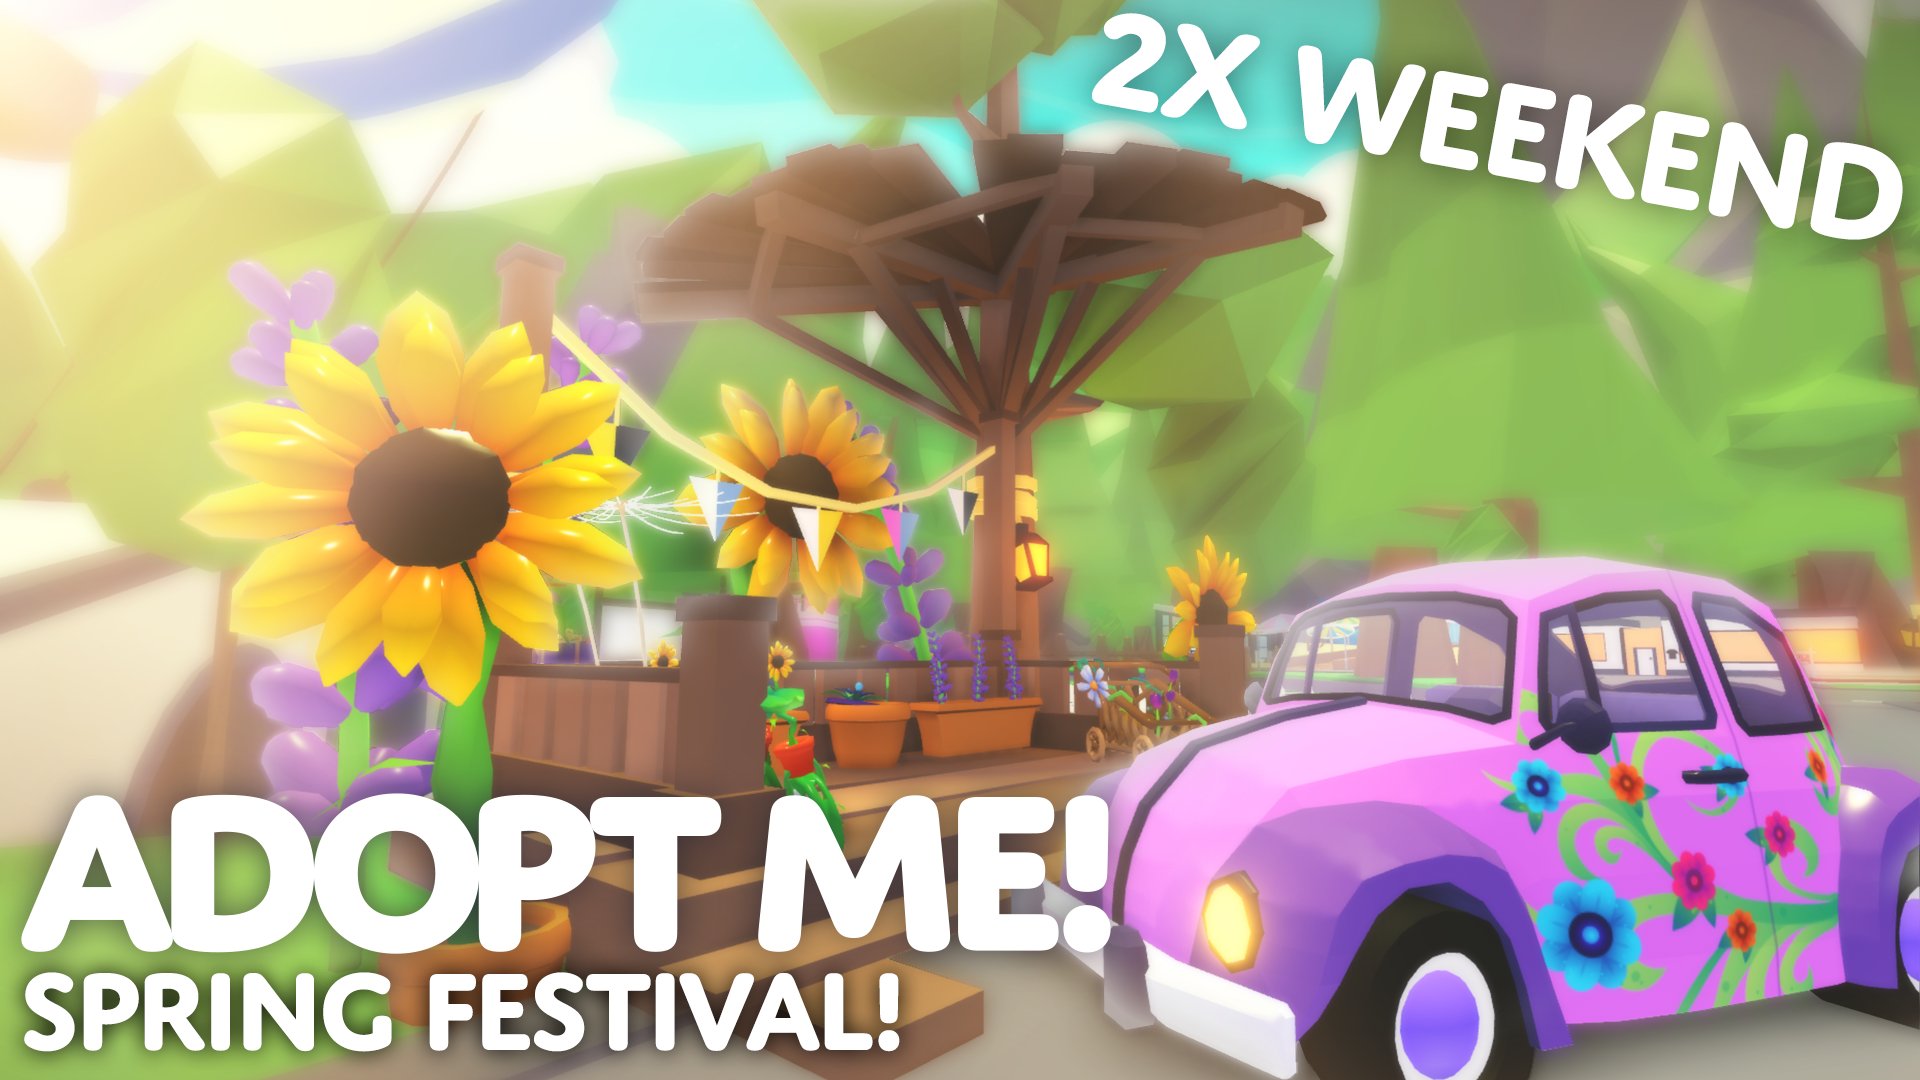 Adopt Me On Twitter Spring Festival Update 2x Pet Aging Bucks Until Monday Midnight Pst 7 New Spring Items Feel The Flower Power In Your New Flower Wagon Increased - cars adopt me roblox